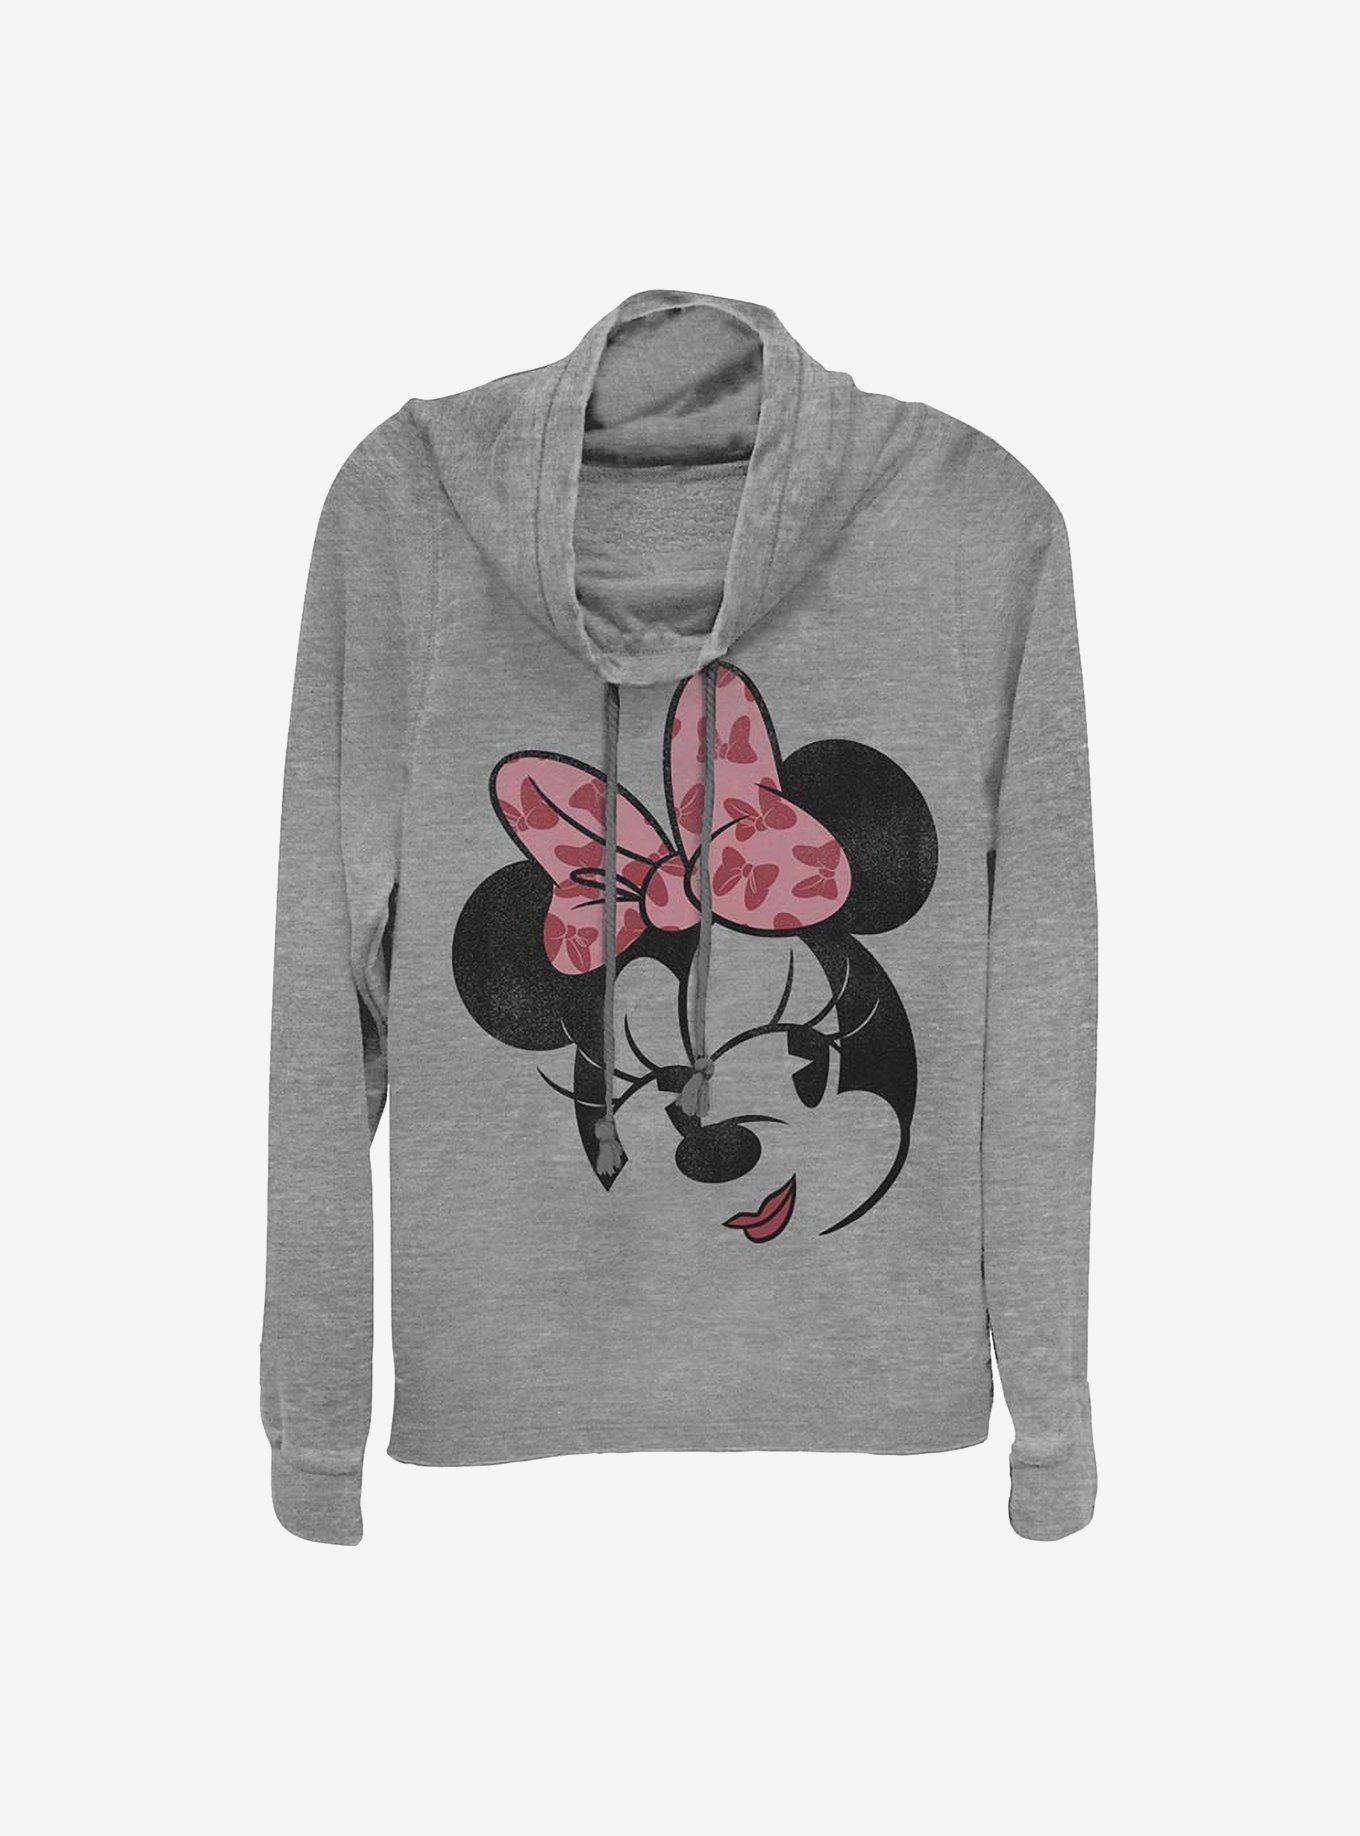 Disney Minnie Mouse Minnie Face Cowlneck Long-Sleeve Girls Top, GRAY HTR, hi-res